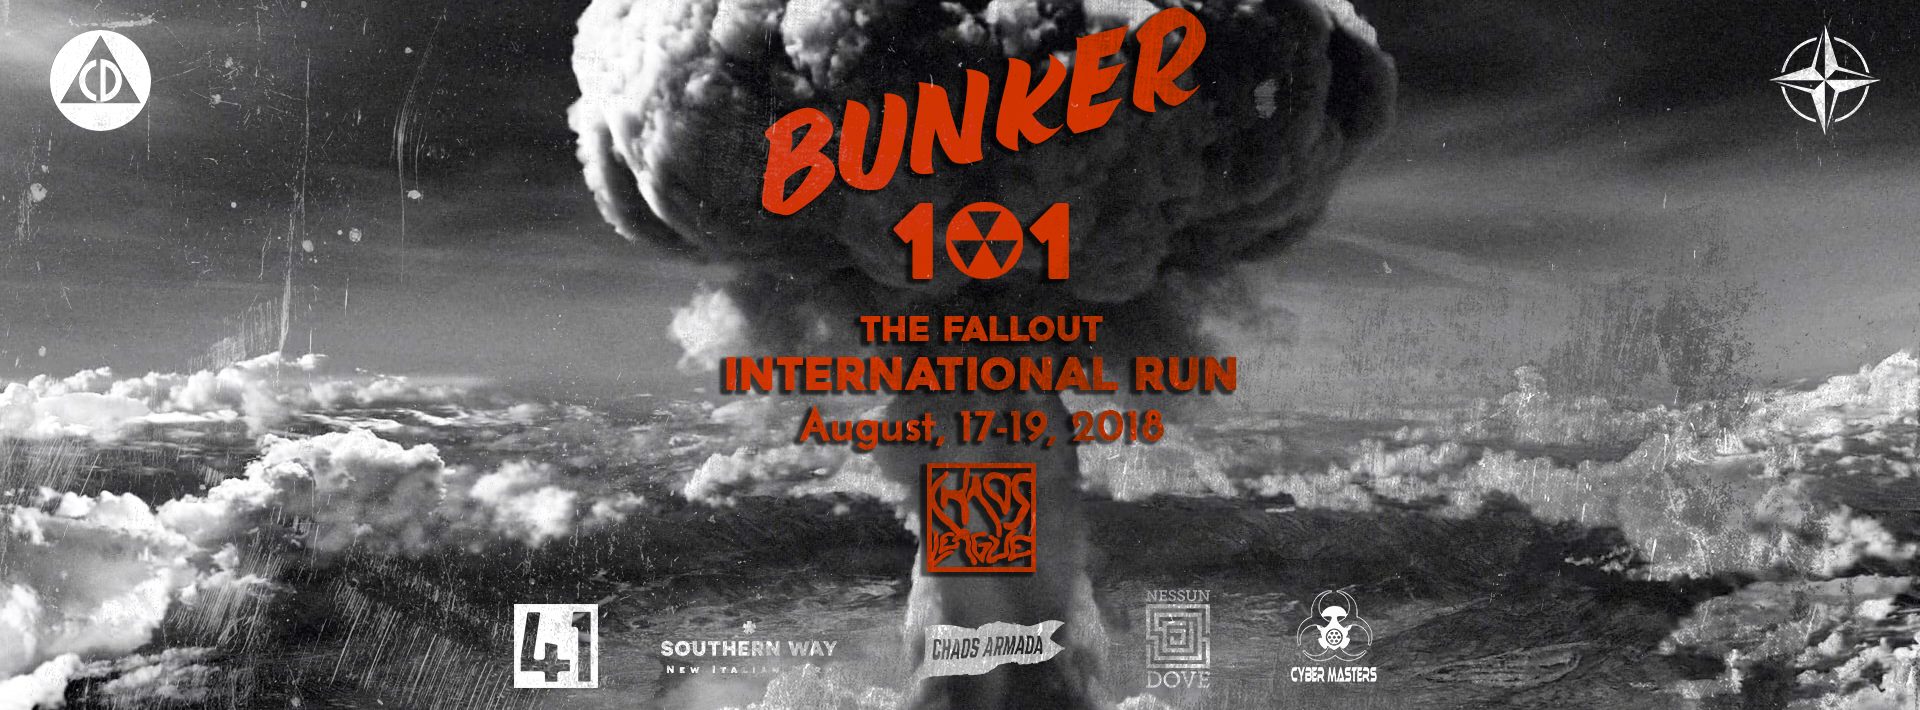 BUNKER 101 – THE FALLOUT